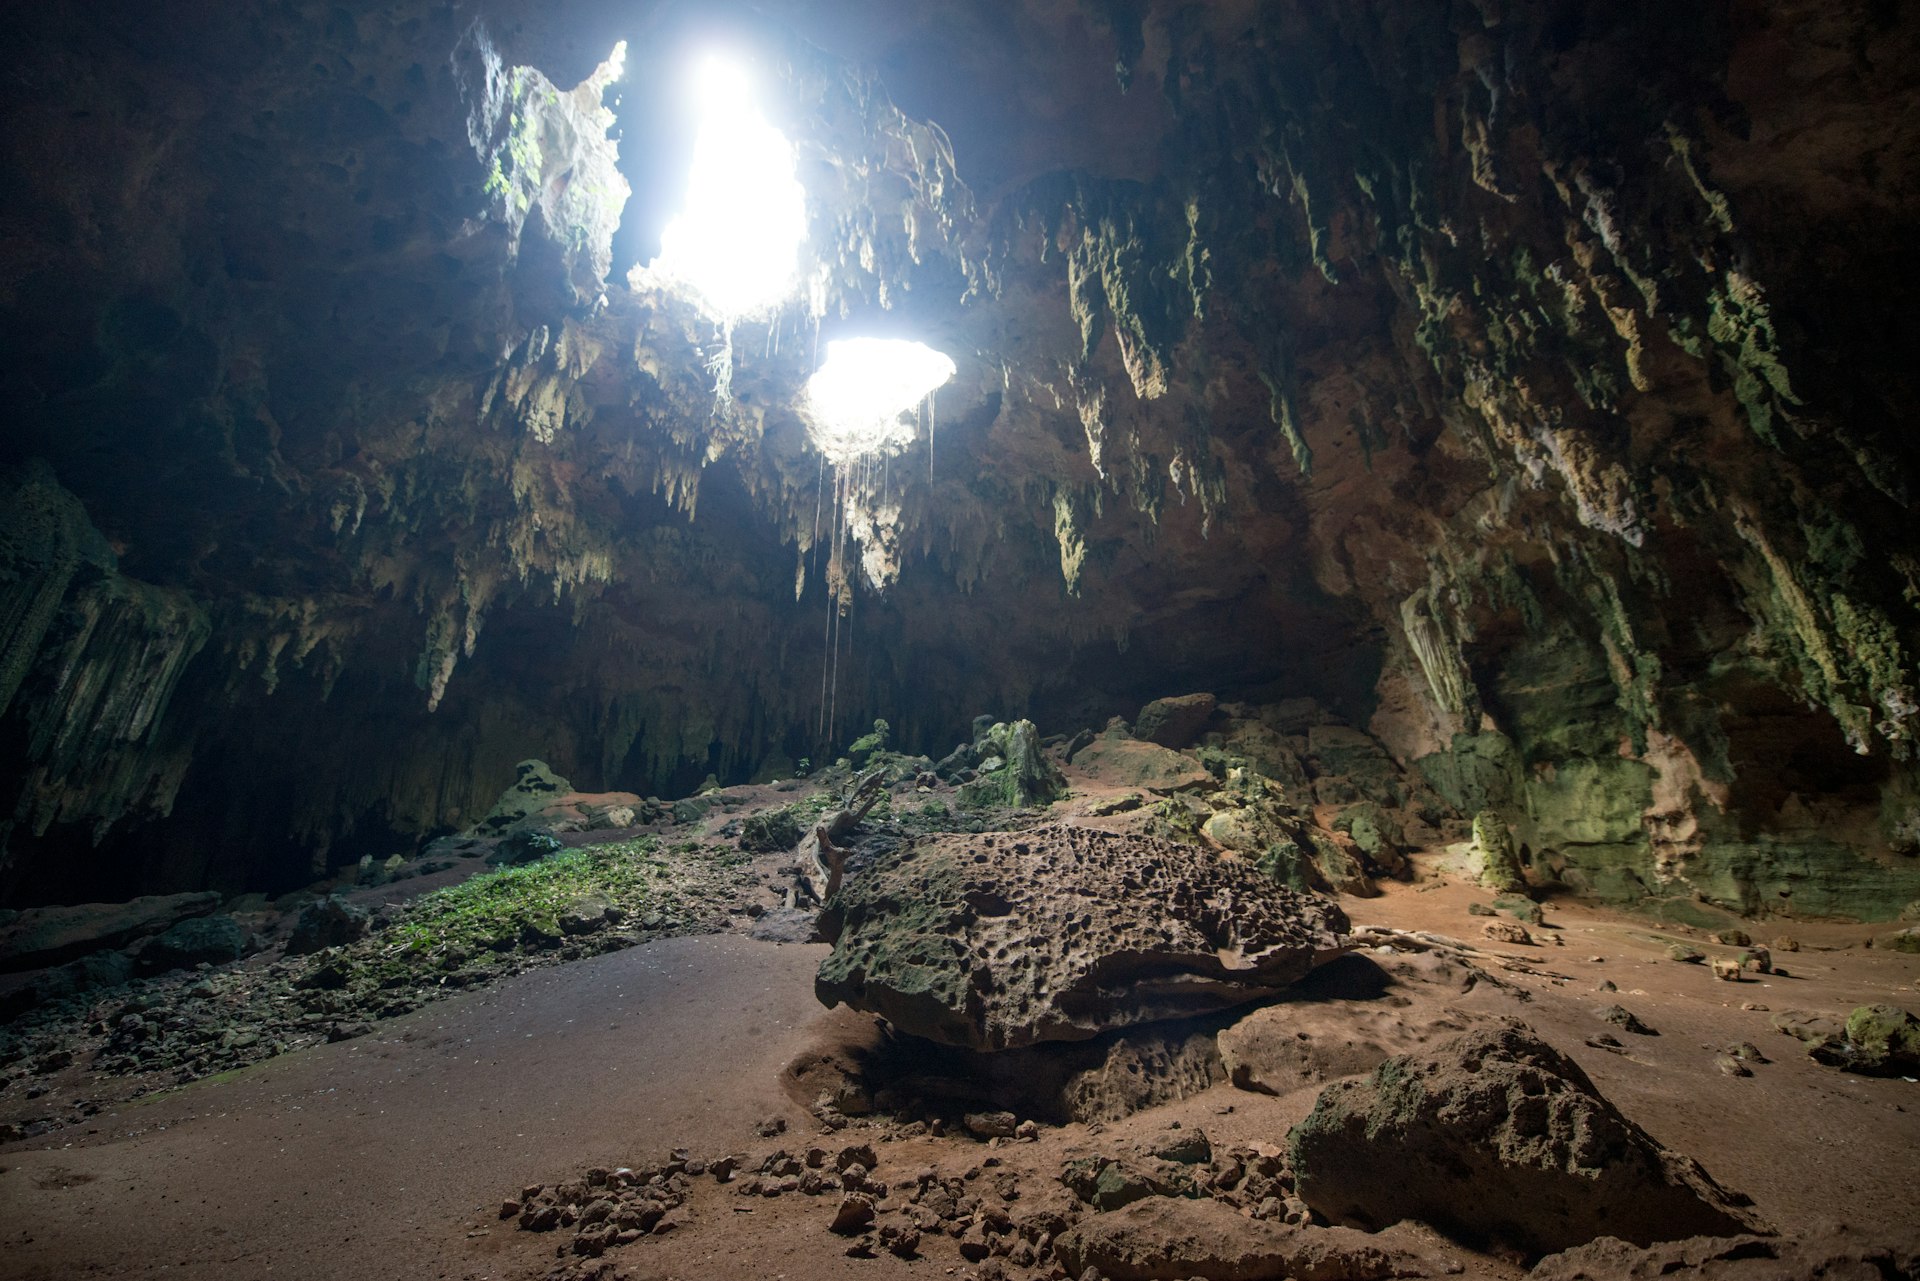 A dark cave with stalactites hanging down, and two large holes in the cave roof allowing some light to come in